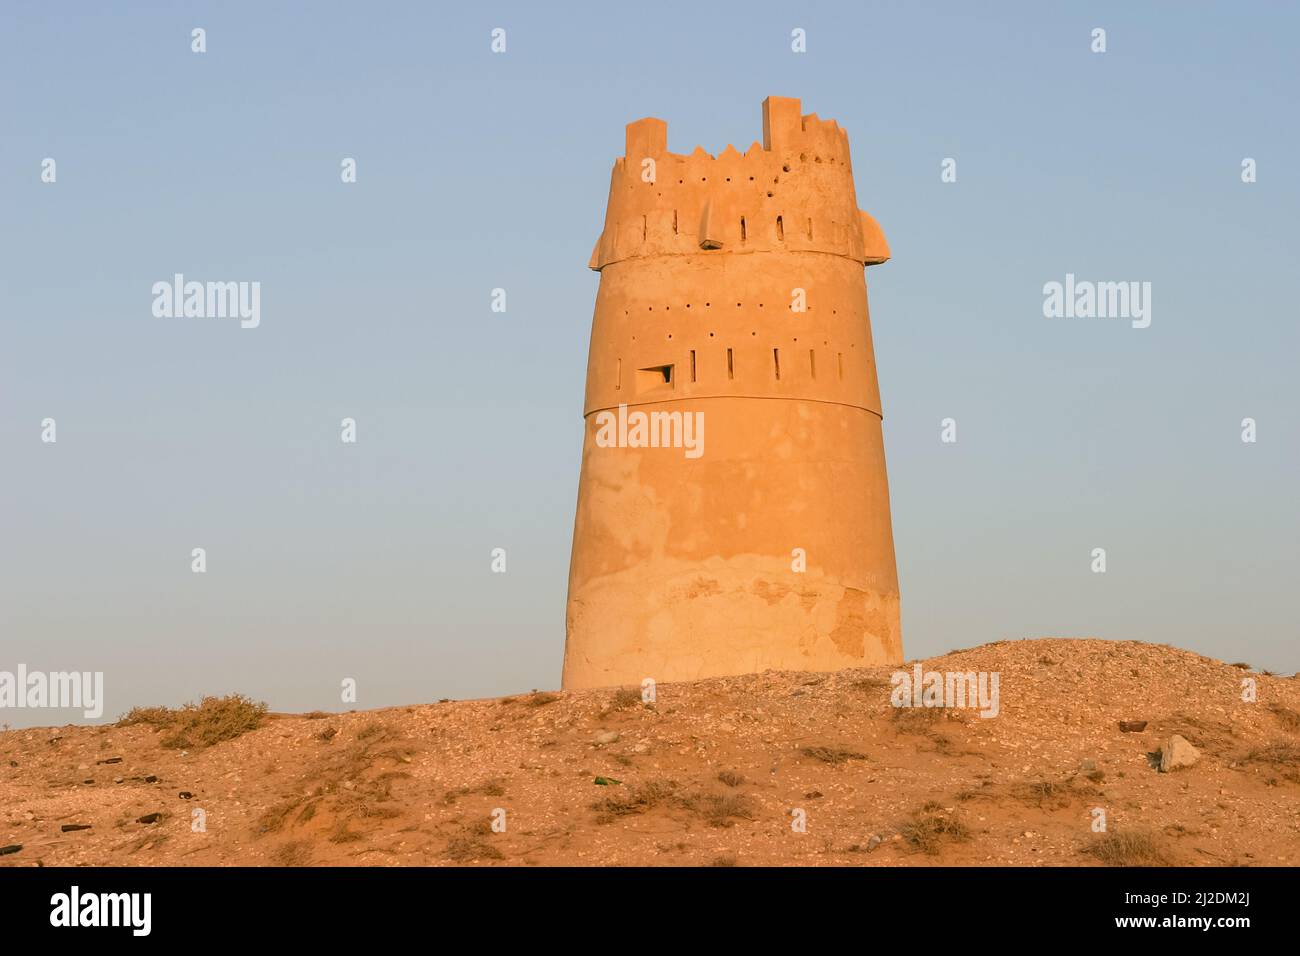 One of the watch towers that guard the approach to Ras al Khaimah city in the United Arab Emirates. Note the mound of shells in the foreground. Stock Photo